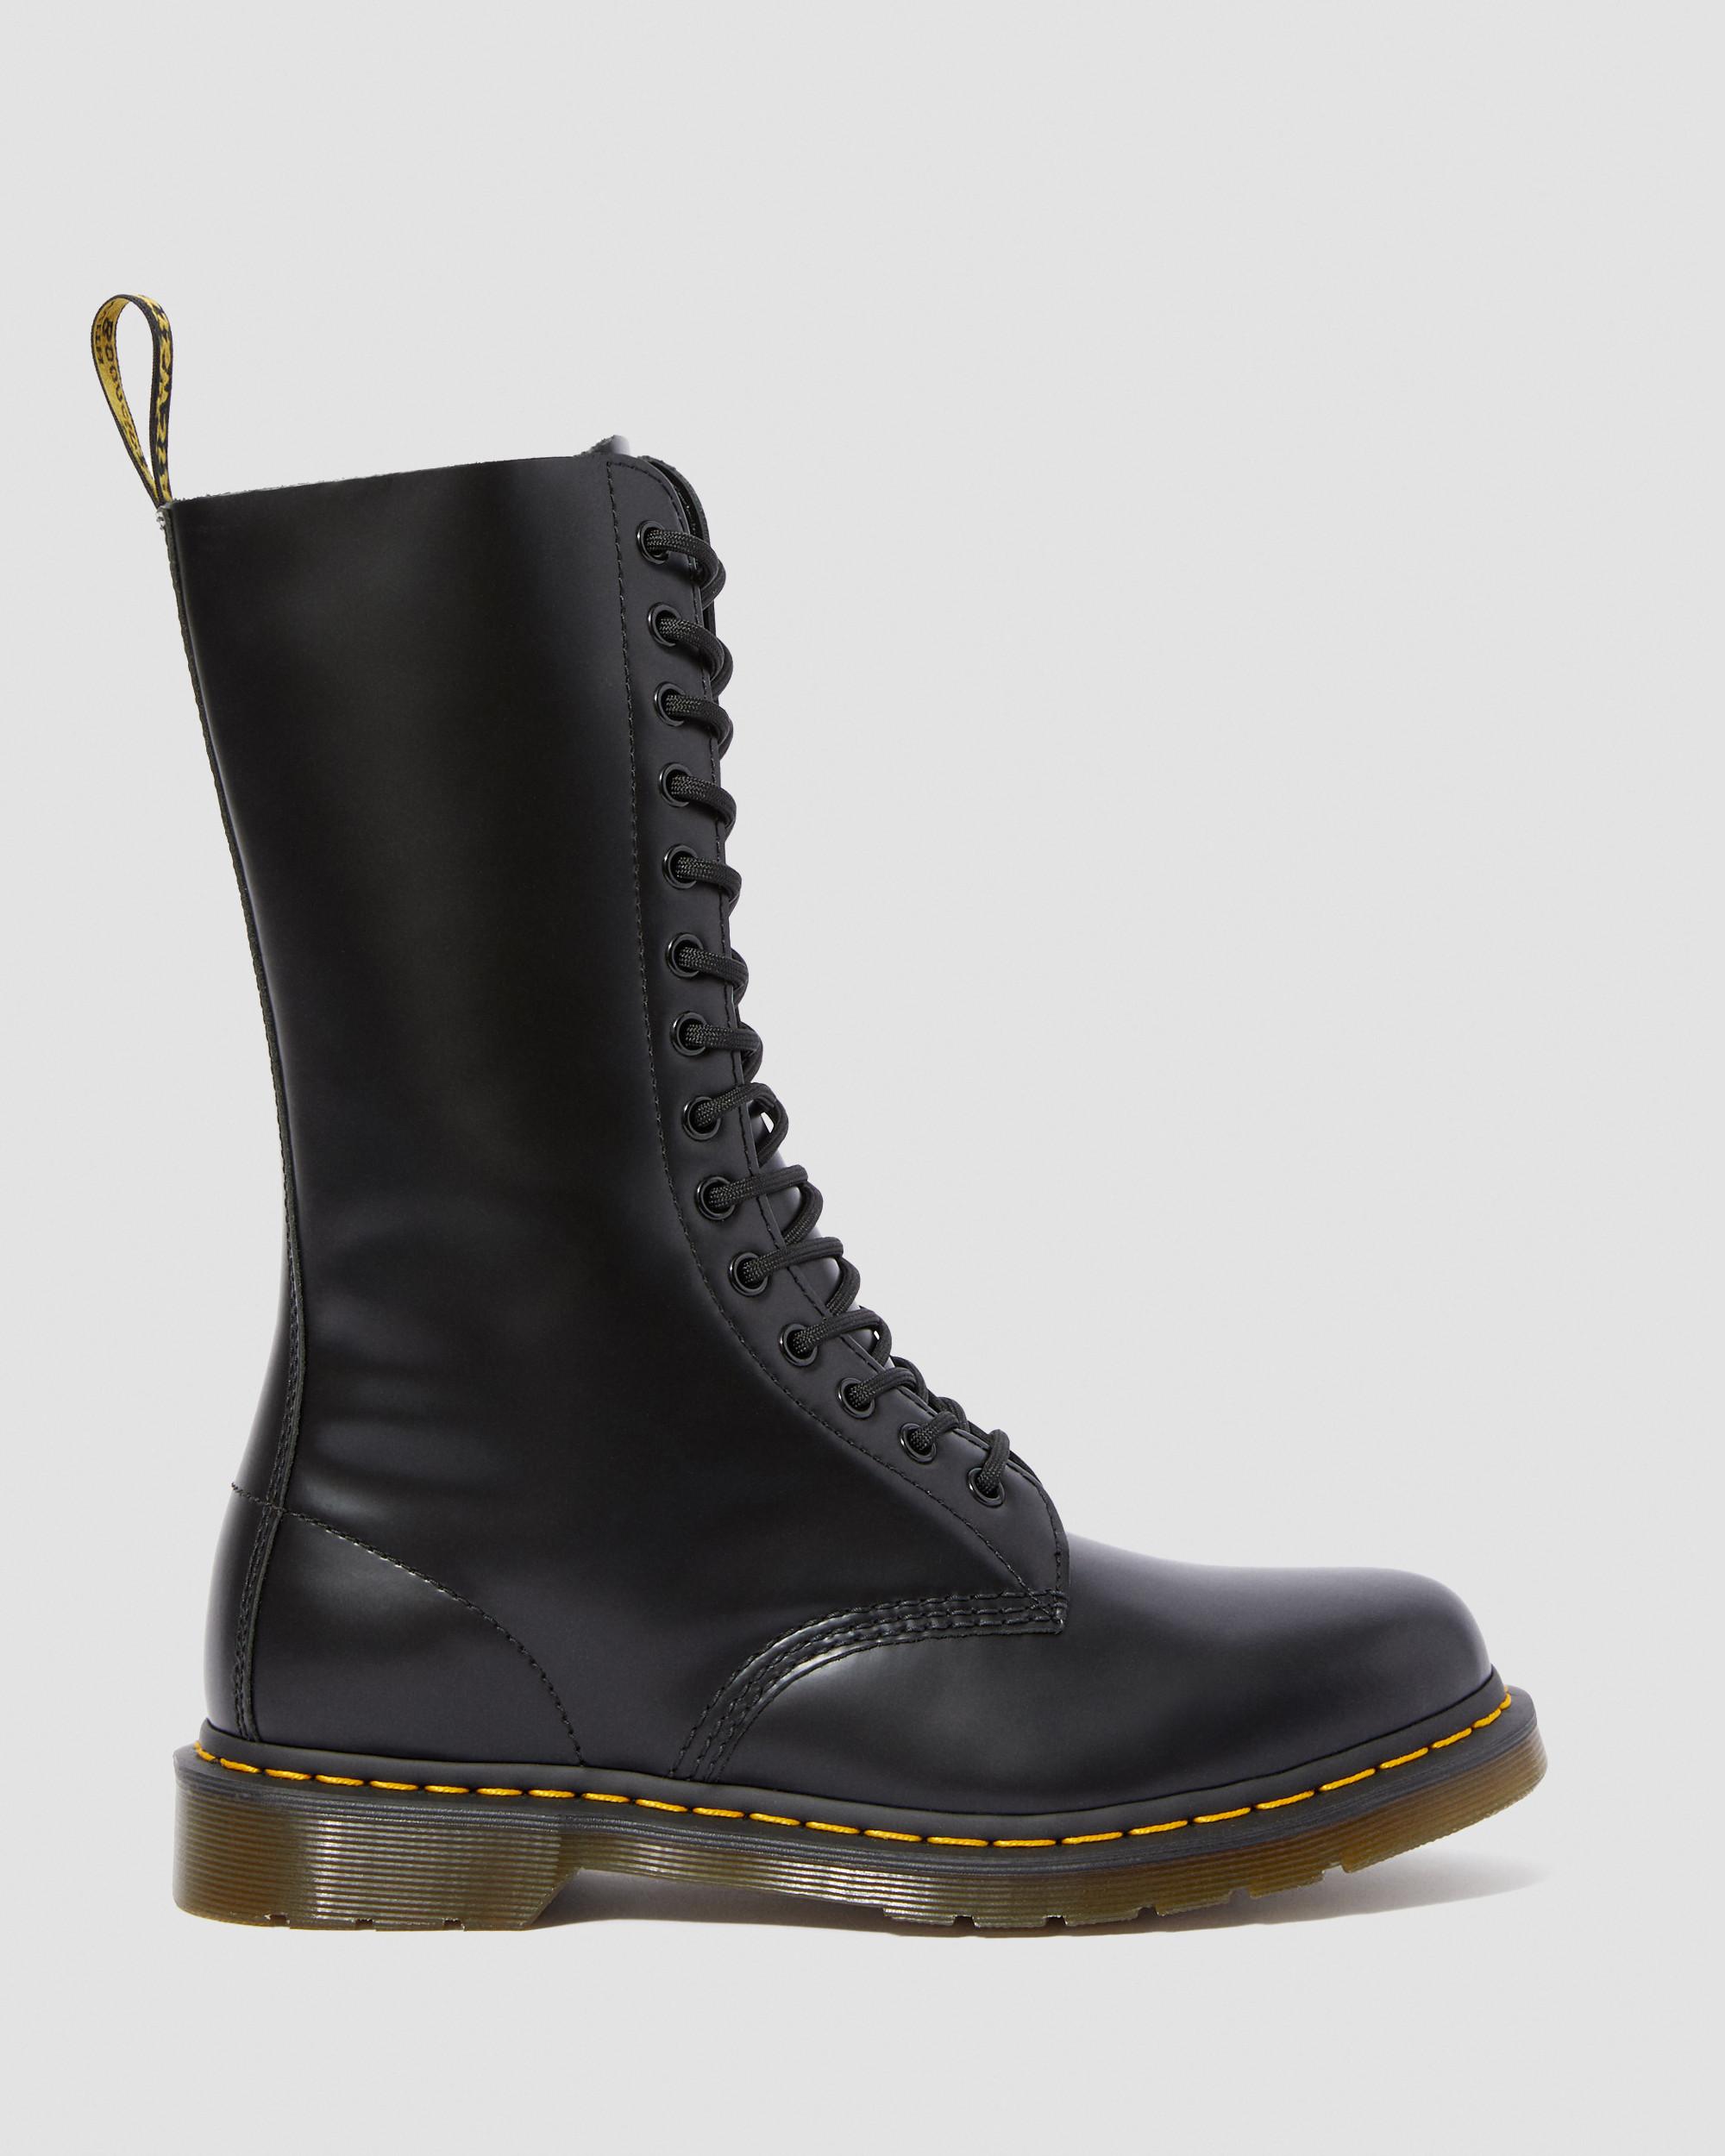 1914 Smooth Leather Tall Boots, Black | Dr. Martens